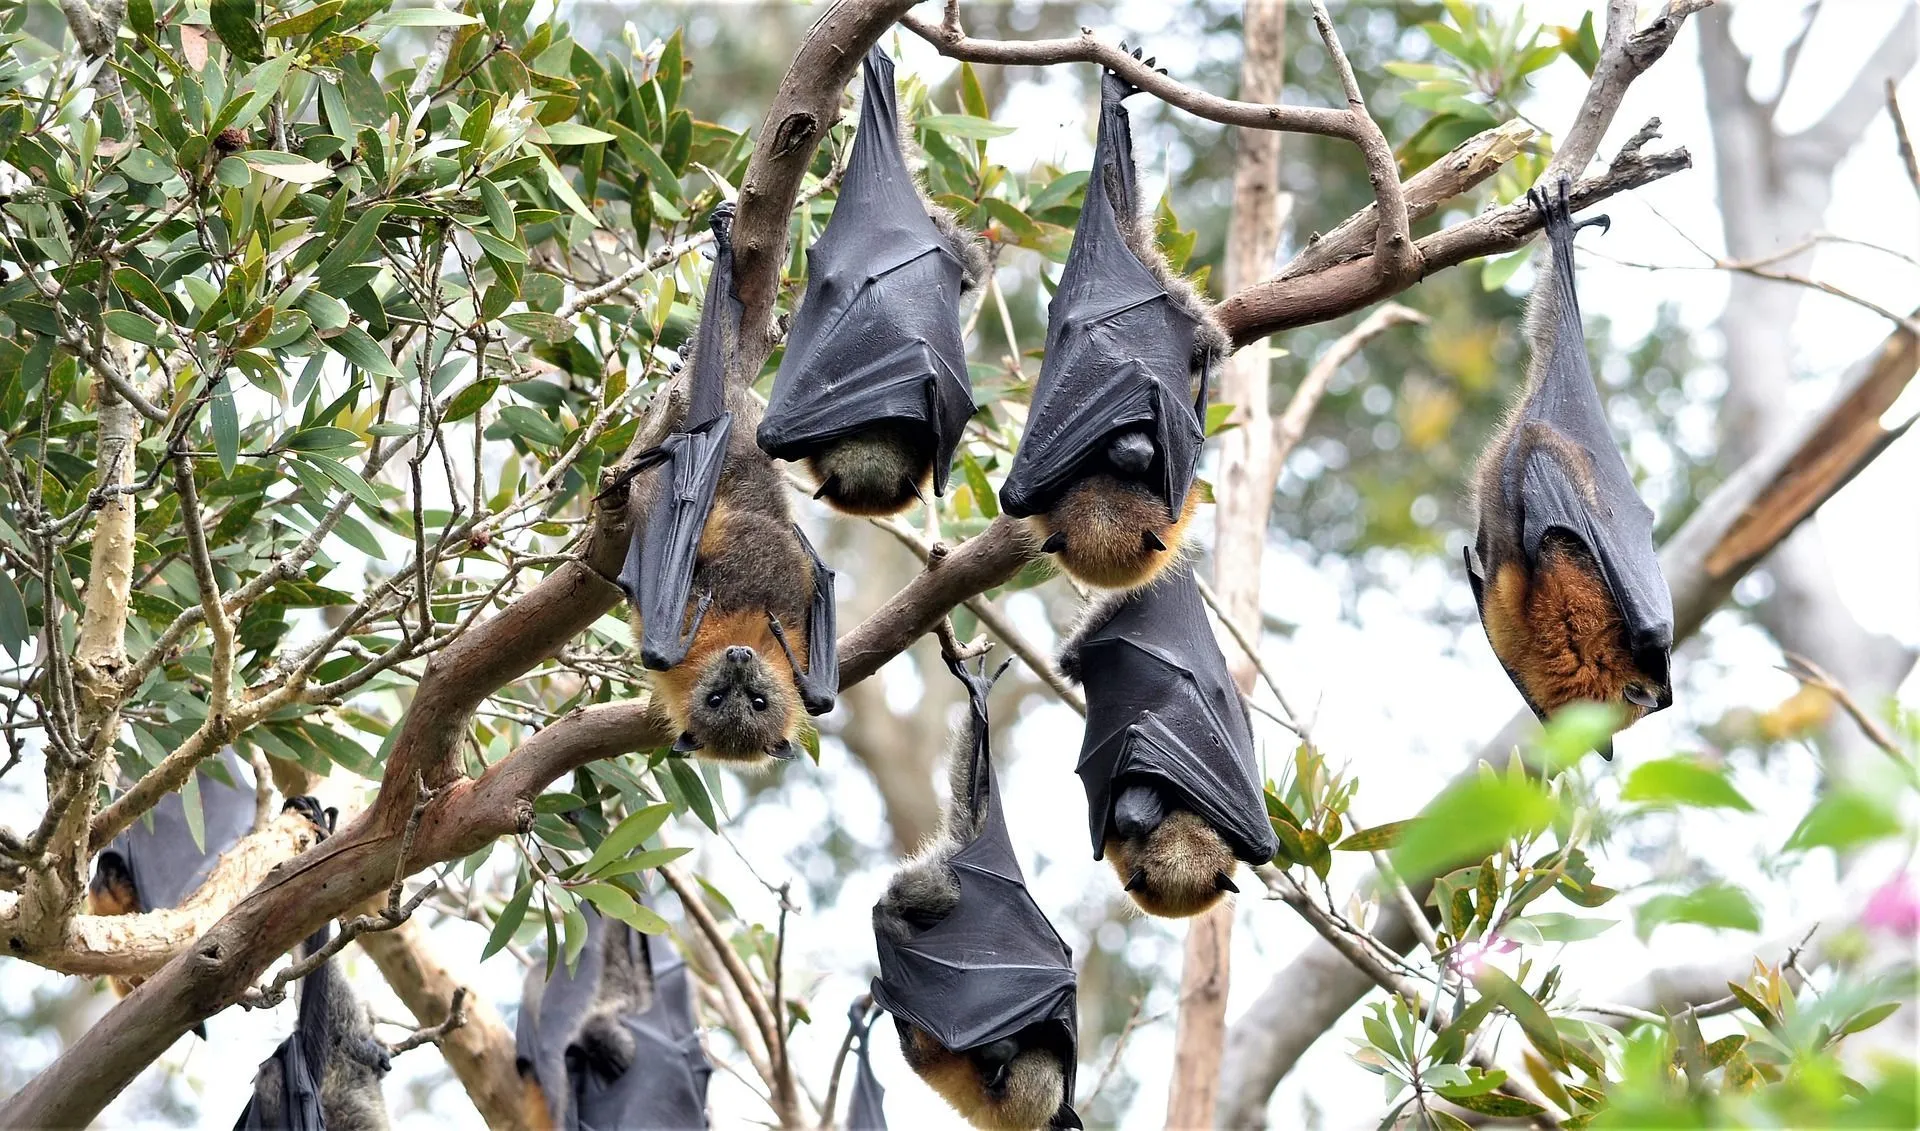 Bats are sociable creatures who prefer to gather in groups. This group of bats is described as a colony, cauldron, cloud, or camp.